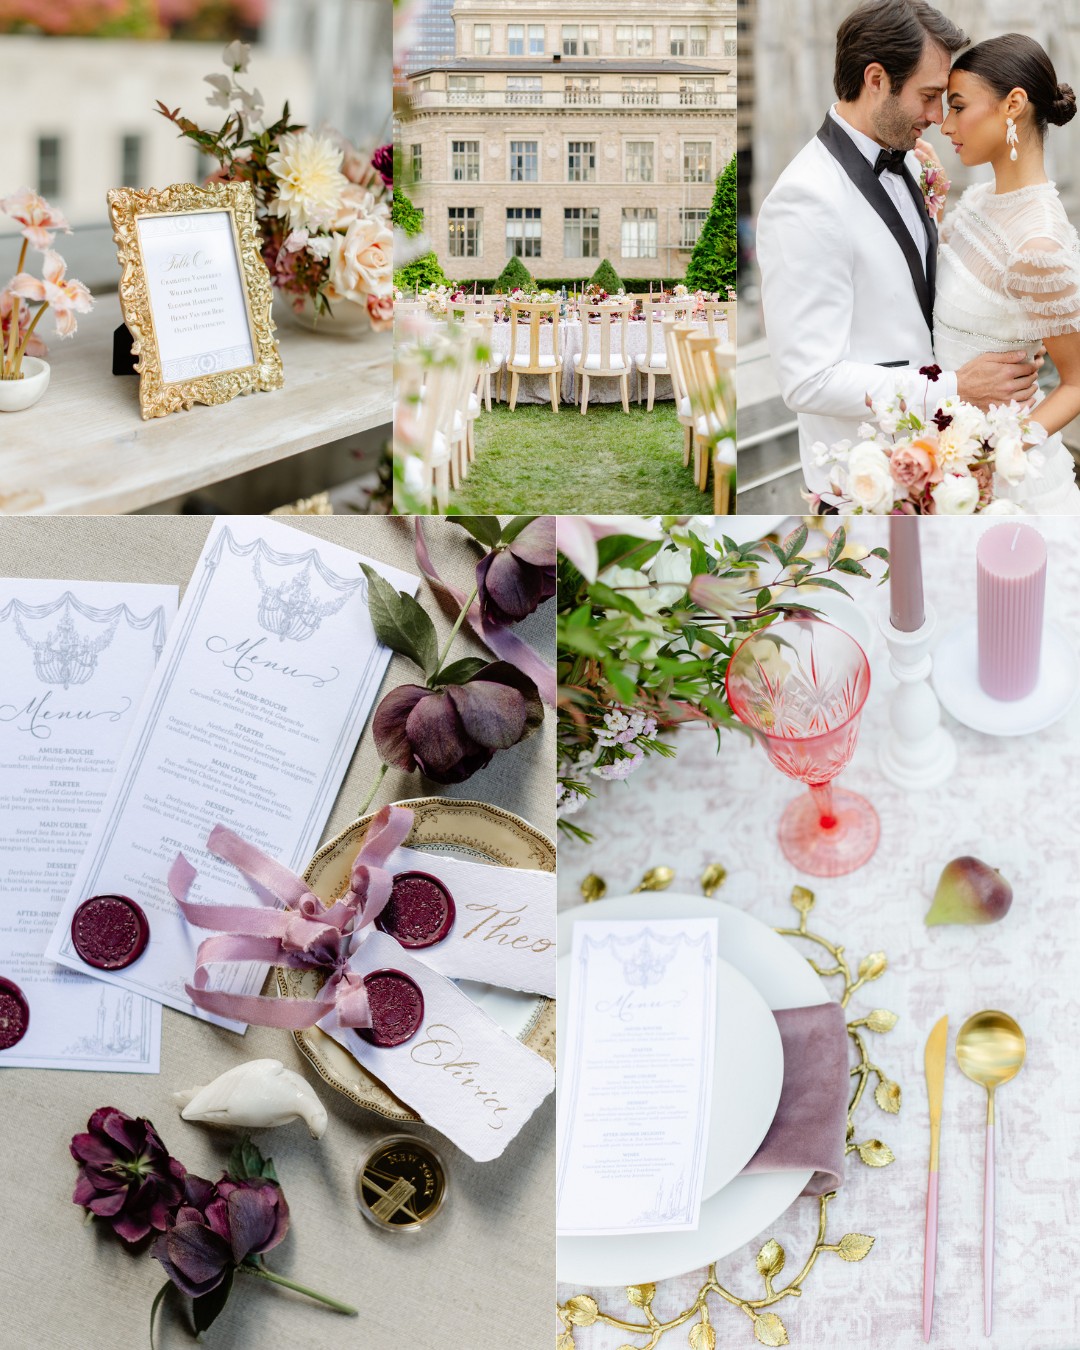 collage of reception elements, couple embracing and stationery including menus